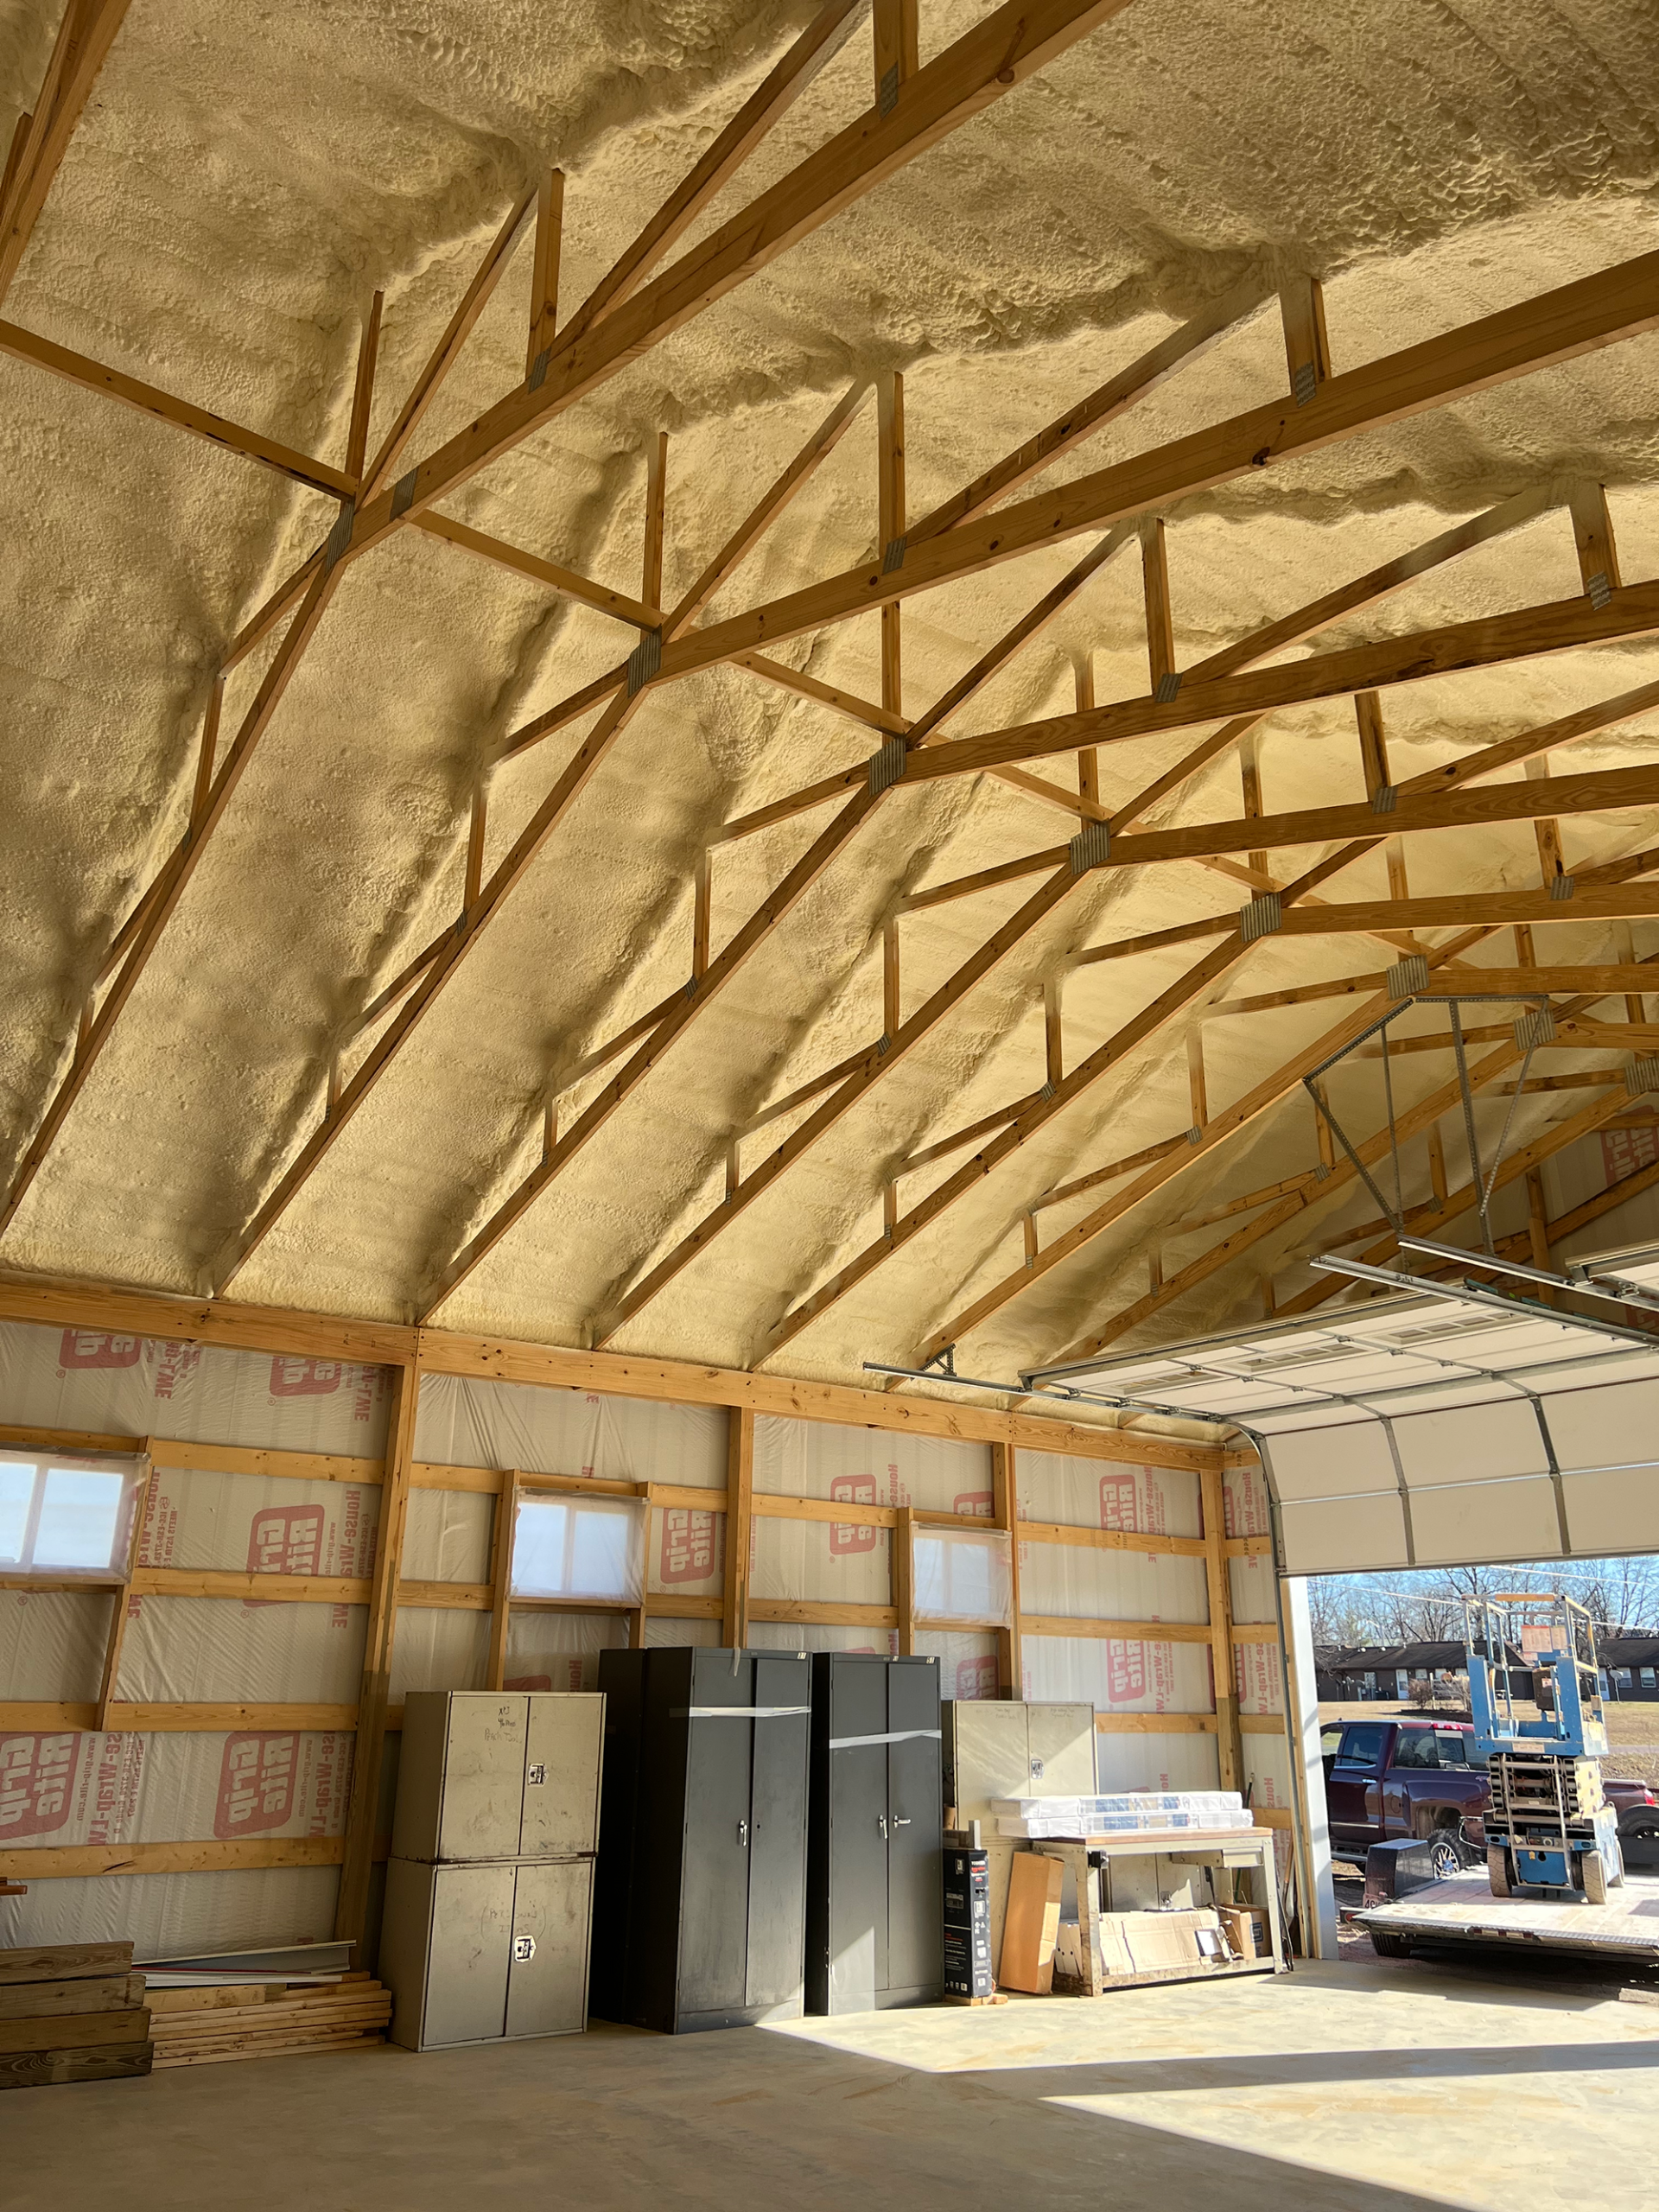 Upgrade Your Mid-Missouri Home With DK Spray Foam & Insulation Services